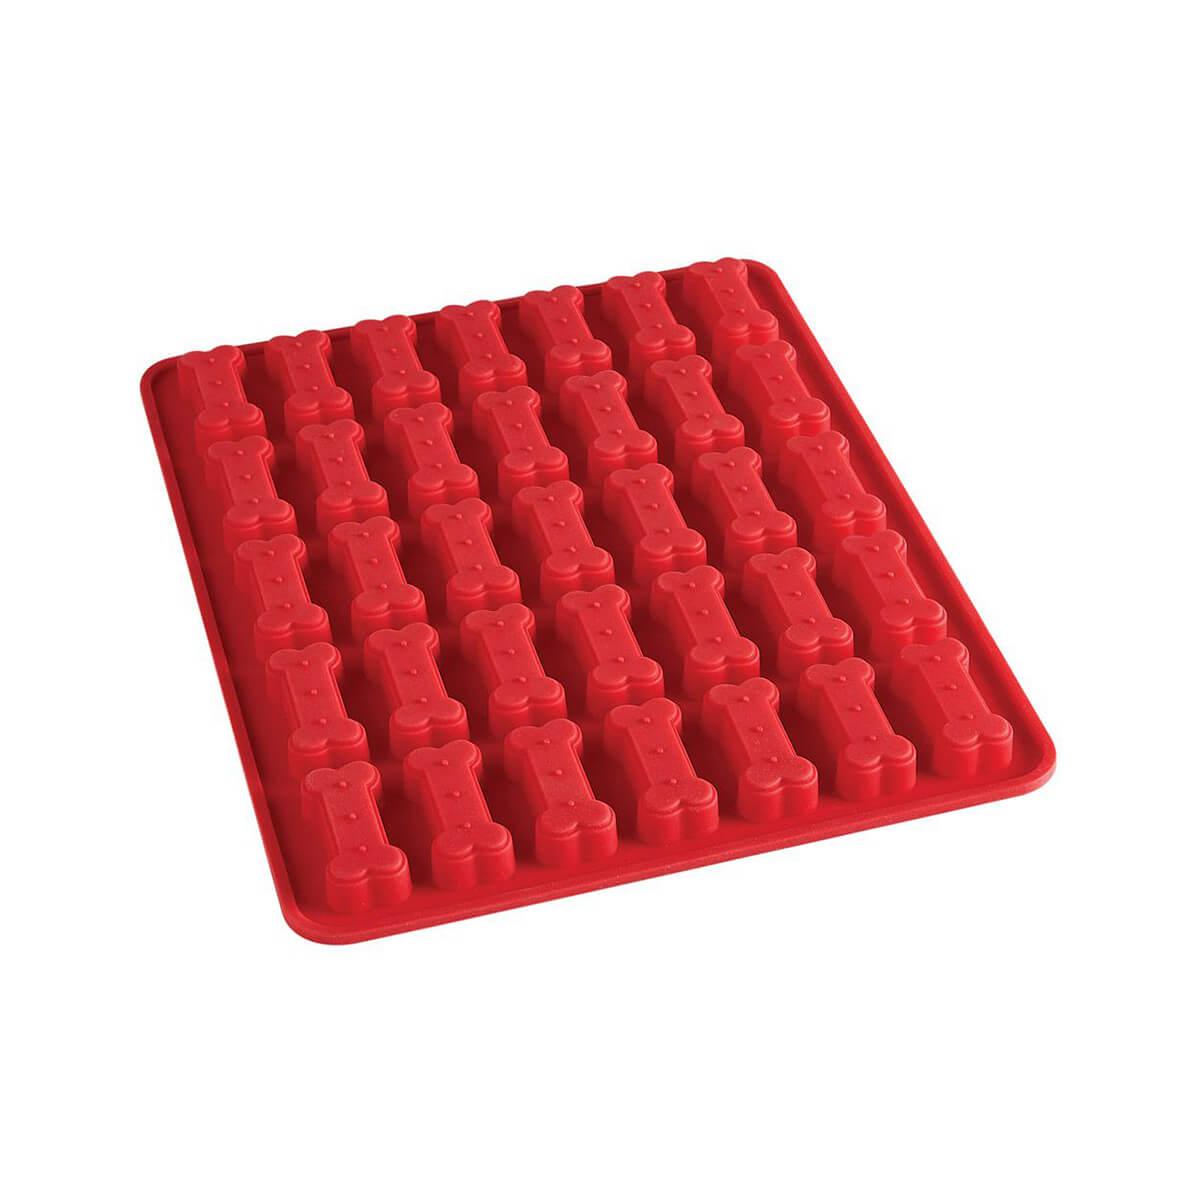 Dog Treat Molds Mini Silicone Mold For Candy, Chocolate, Biscuit, Dog Treats-  For Baking&freezing